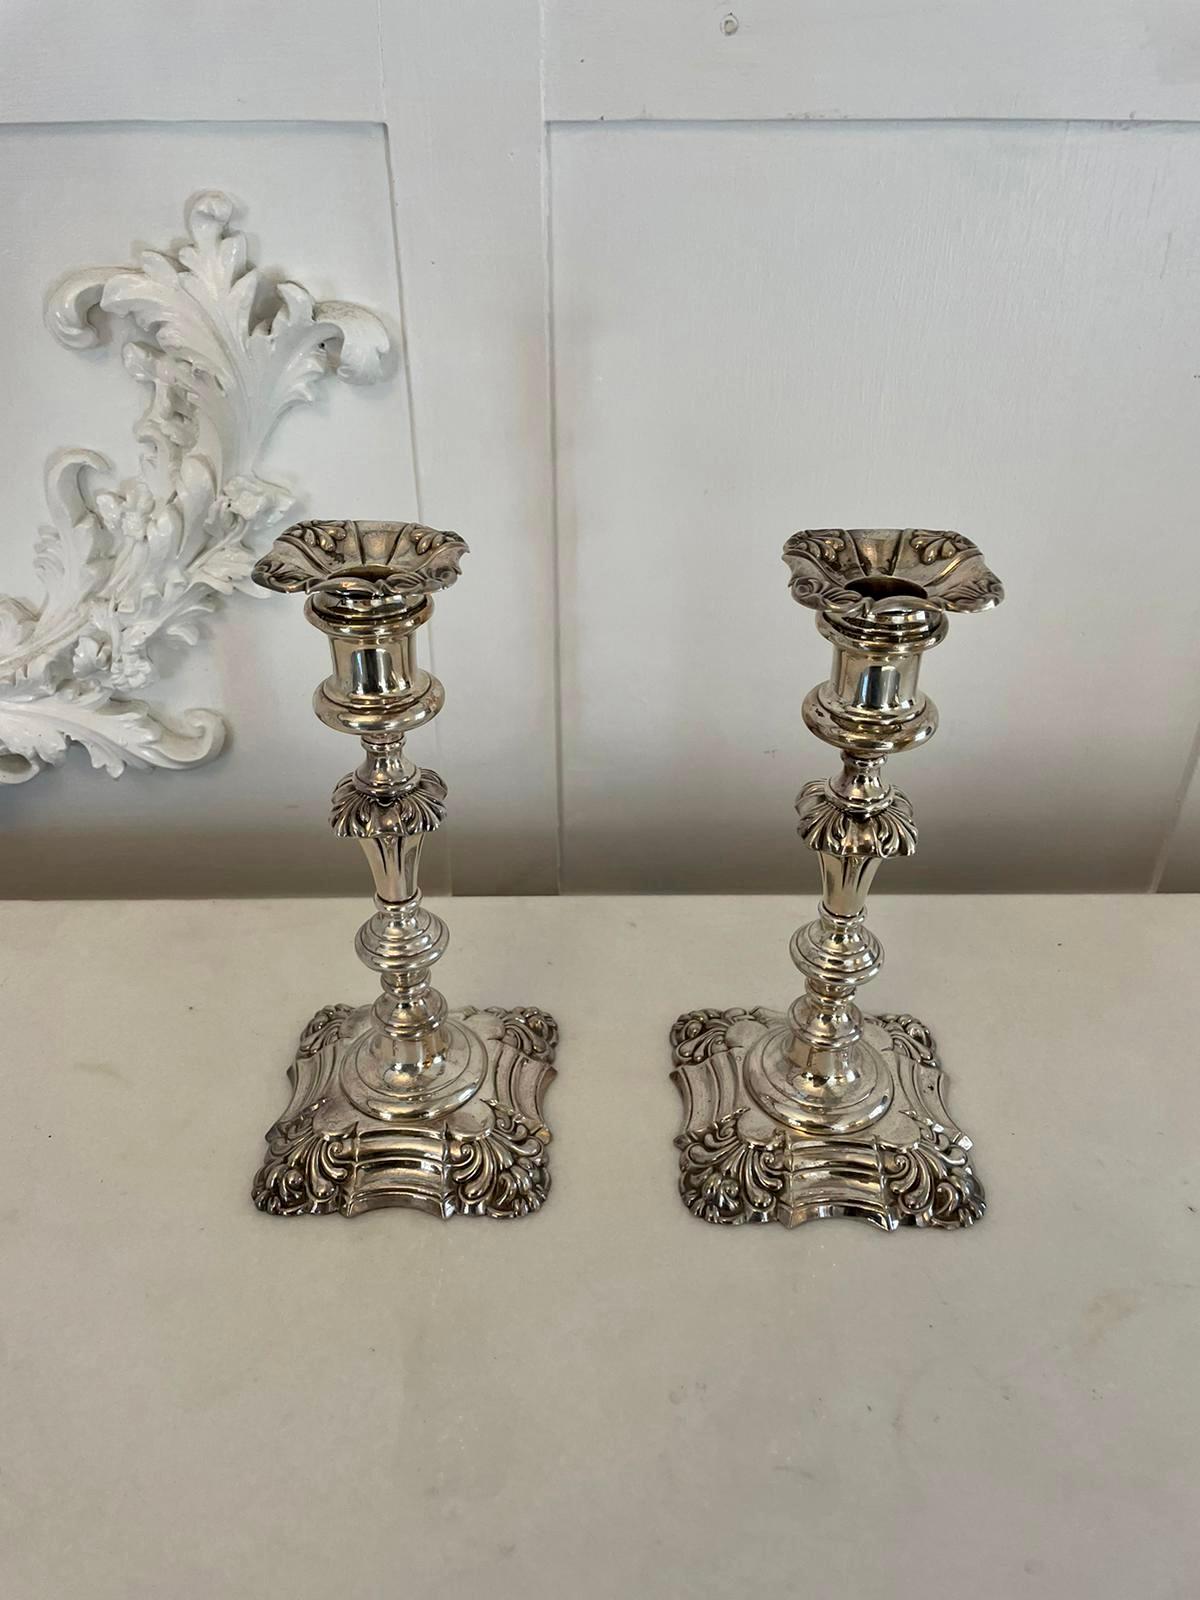 Unusual pair of antique George III quality Sheffield plated telescopic candlesticks having a quality pair of antique George III Sheffield plated telescopic candlesticks with ornate decoration 

A charming original pair in wonderful original